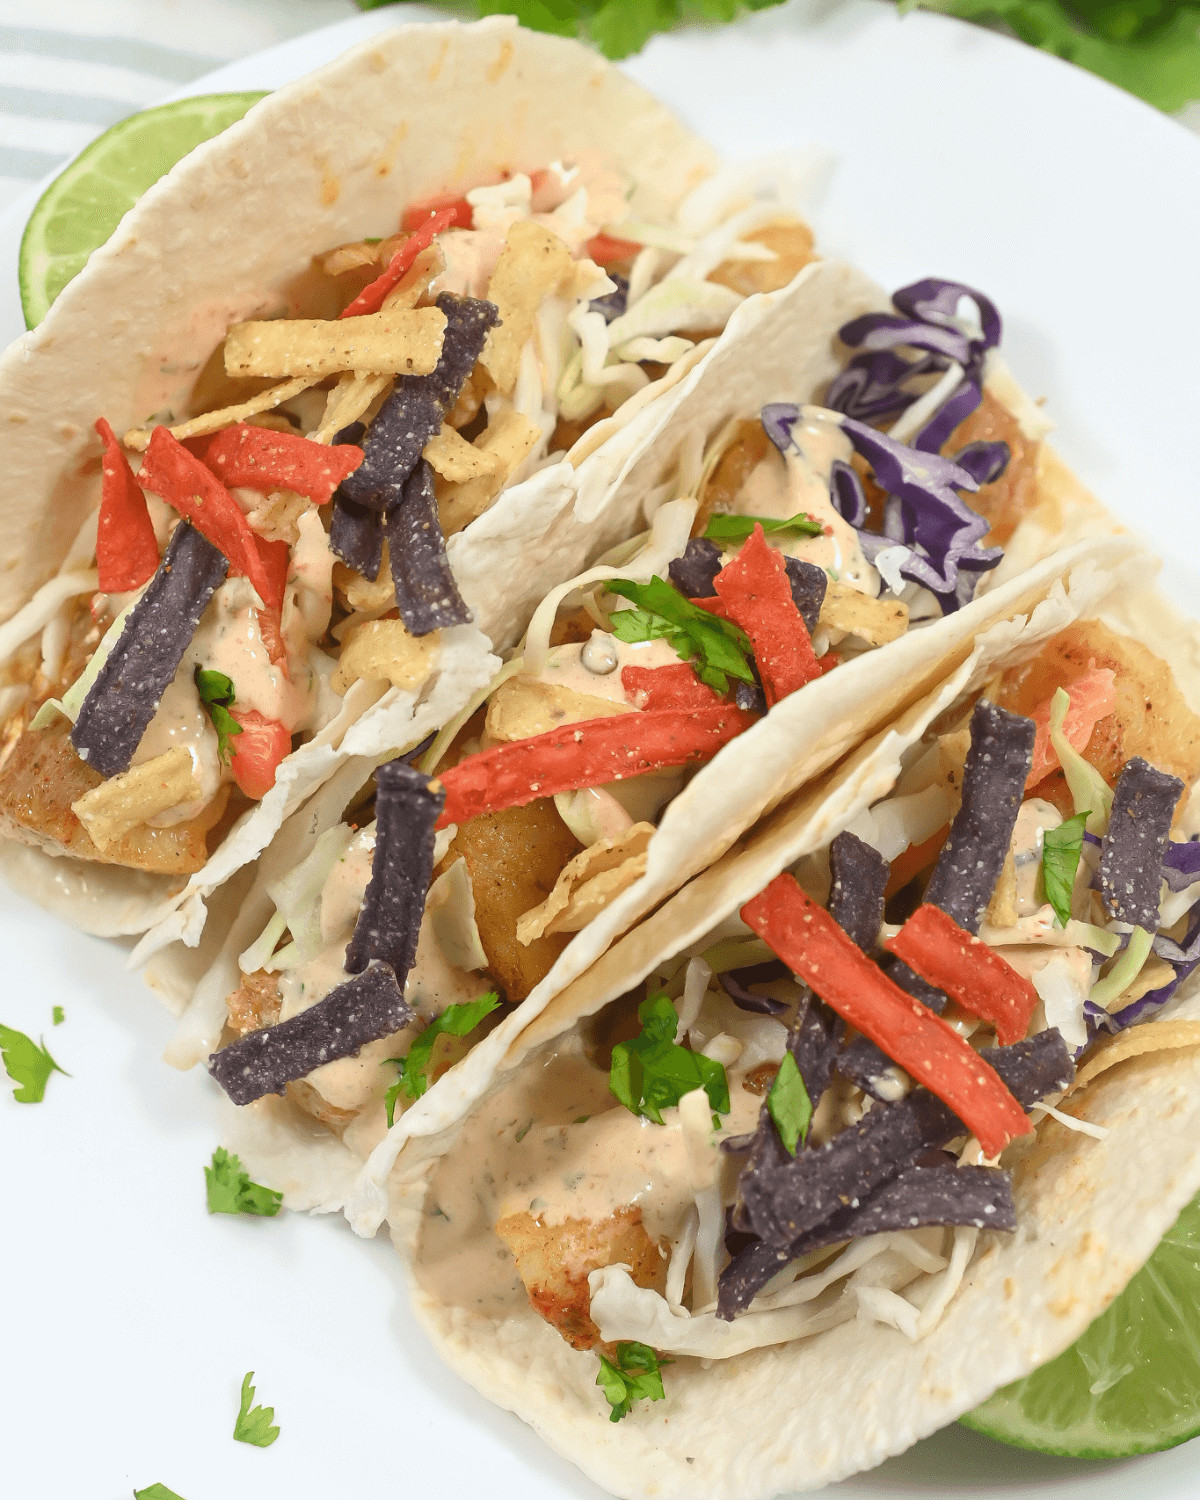 Baja fish tacos with cabbage slaw and chipotle sauce garnished with tortilla strips and cilantro.